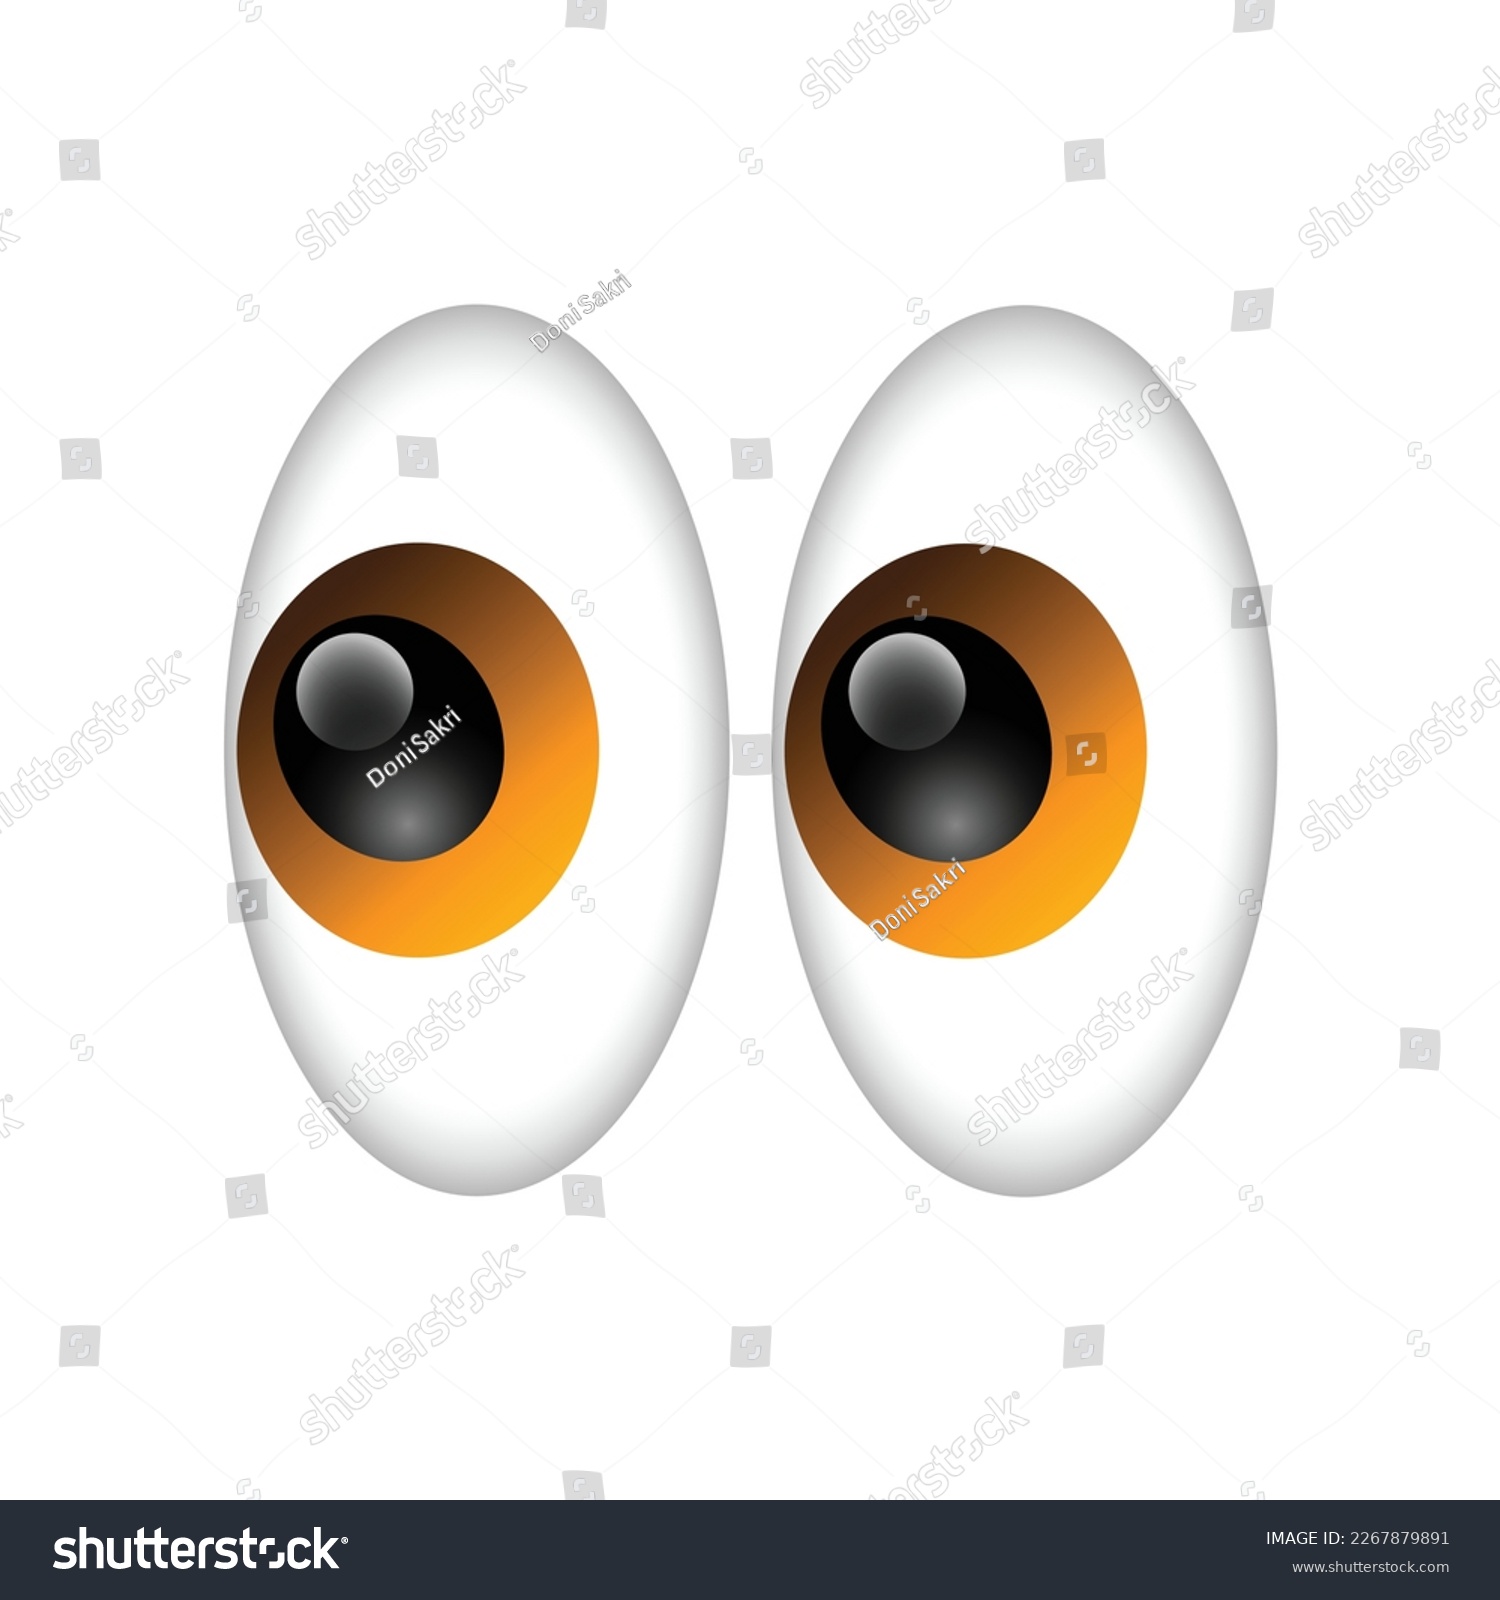 SVG of vector Eyeballs Shifty Wide Eyes emoticons comment social media Facebook Instagram Whatsapp chat comment reactions, icon template face emoji character message svg